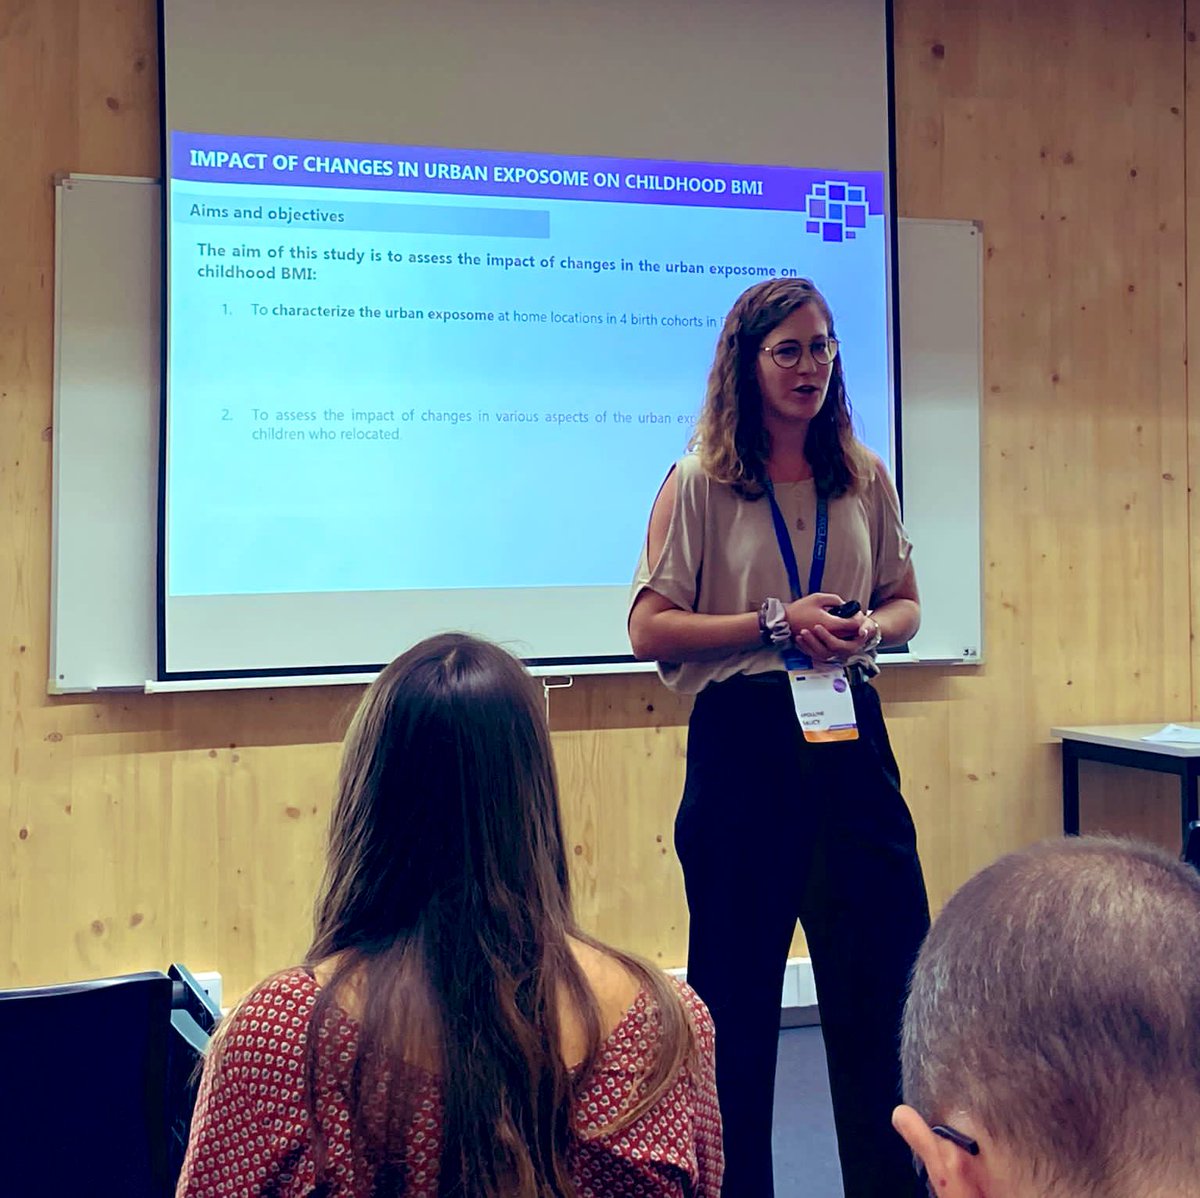 Presenting our results on residential relocation at #SEEPorto2023 #APEPorto2023. Changes in the urban exposome can affect childhood BMI @cathryn_tonne @sarah_warkentin @Jeroen_de_Bont @ErikMelen @vrmlnroel @isglobal